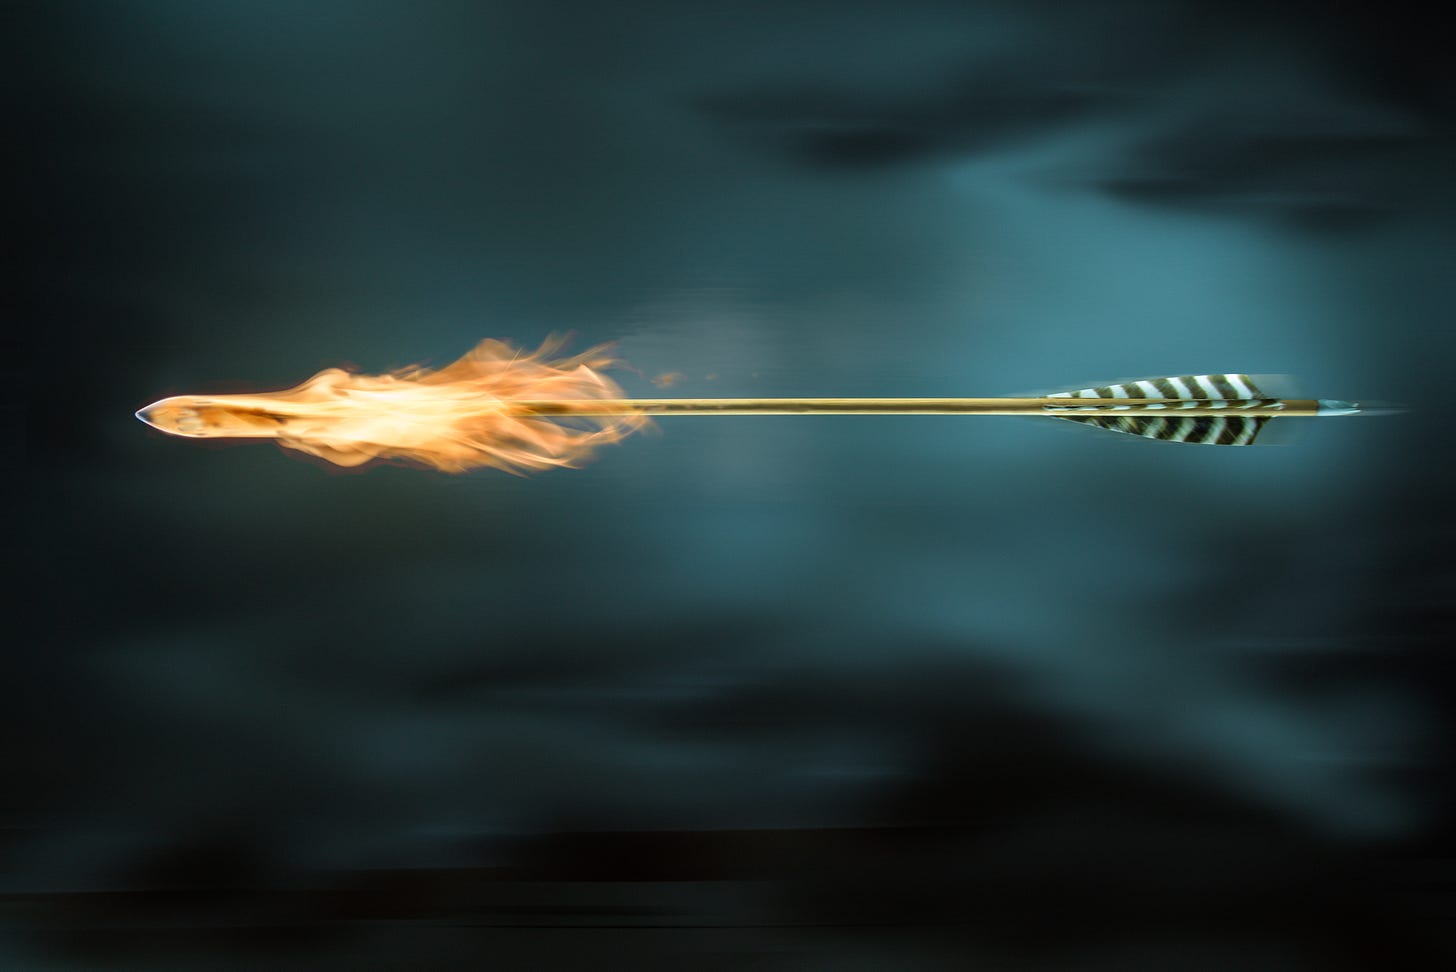 Picture of arrow with a flaming head against a dark clouded sky